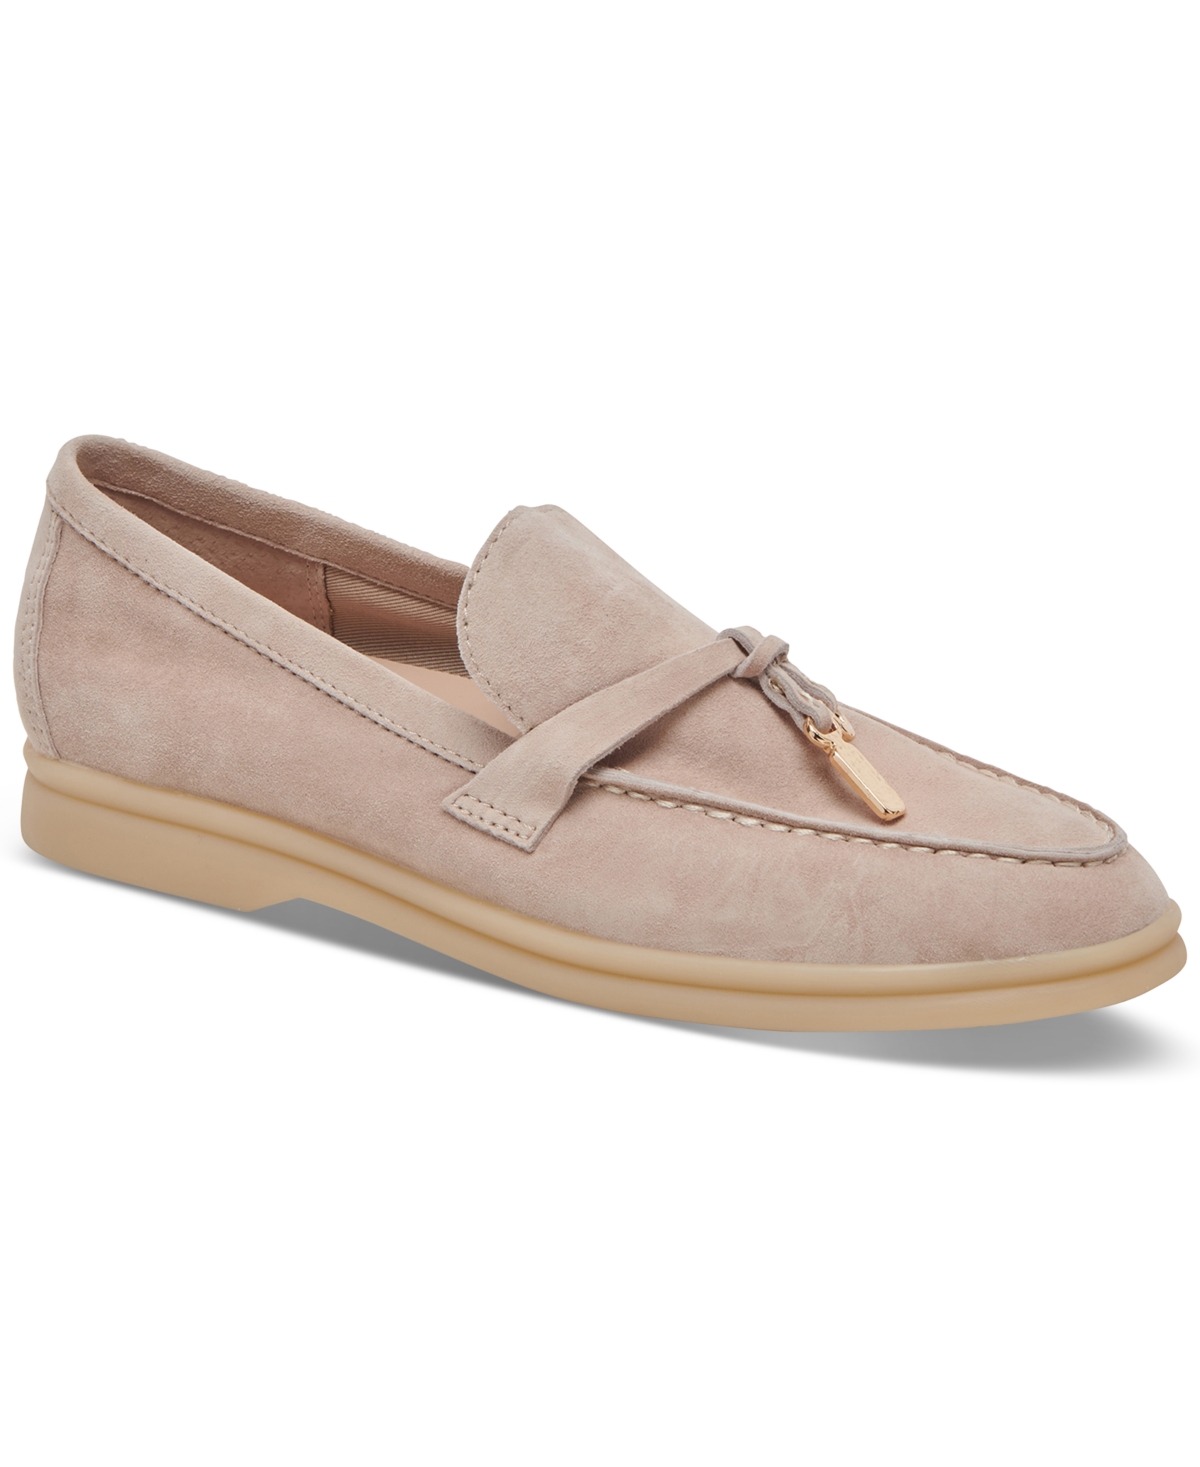 Dolce Vita Women's Lonzo Soft Tassel Loafer Flats In Taupe Suede